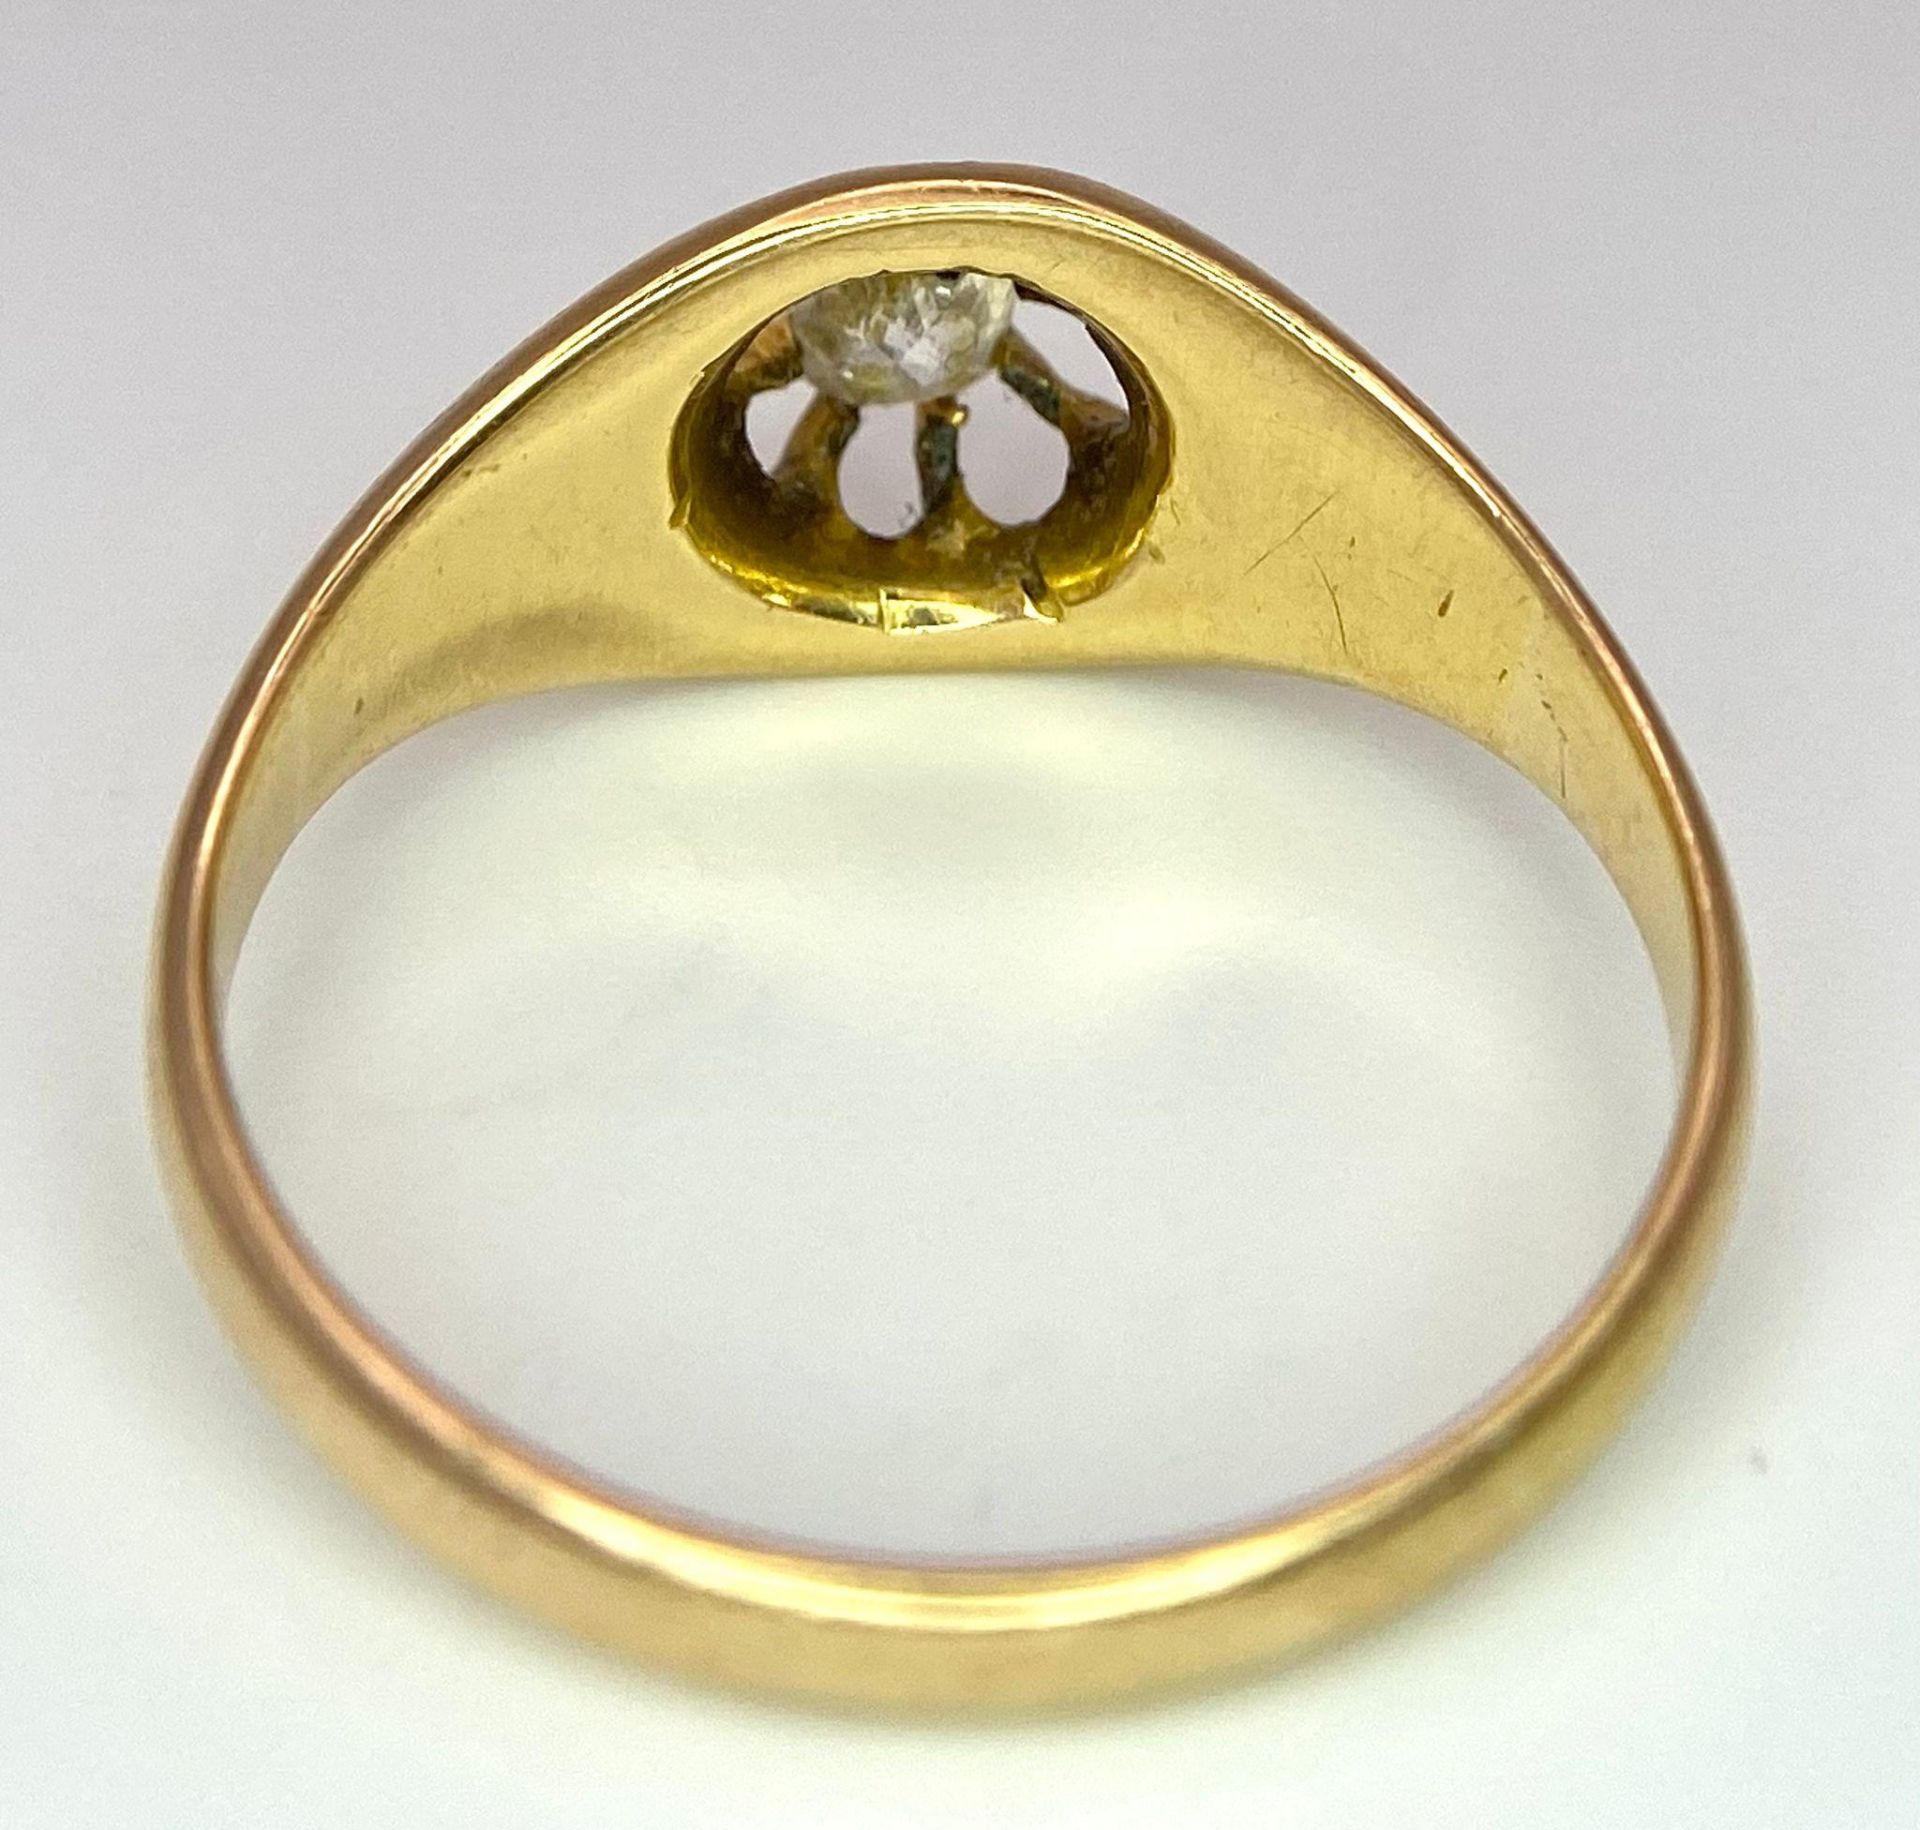 An antique - pre 1900- 18 K yellow gold diamond (0.25 carats) solitaire ring, hallmarked Chester, - Image 6 of 7